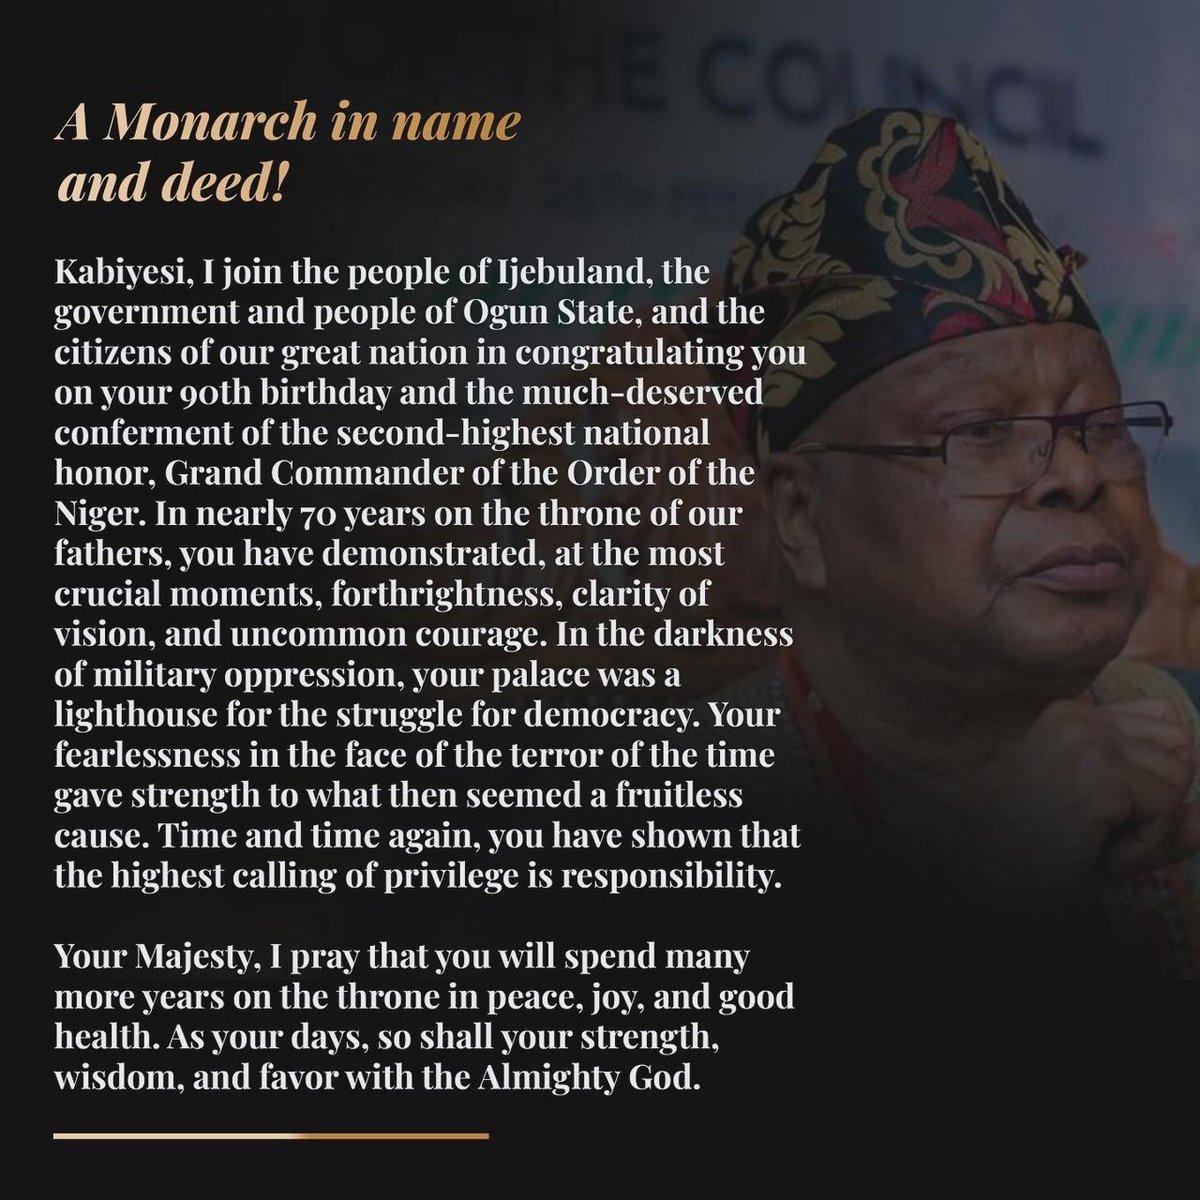 A Monarch in name and deed!

Kabiyesi, I join the people of Ijebuland, the government and people of Ogun State, and the citizens of our great nation in congratulating you on your 90th birthday and the much-deserved conferment of the second-highest national honor, Grand Commander